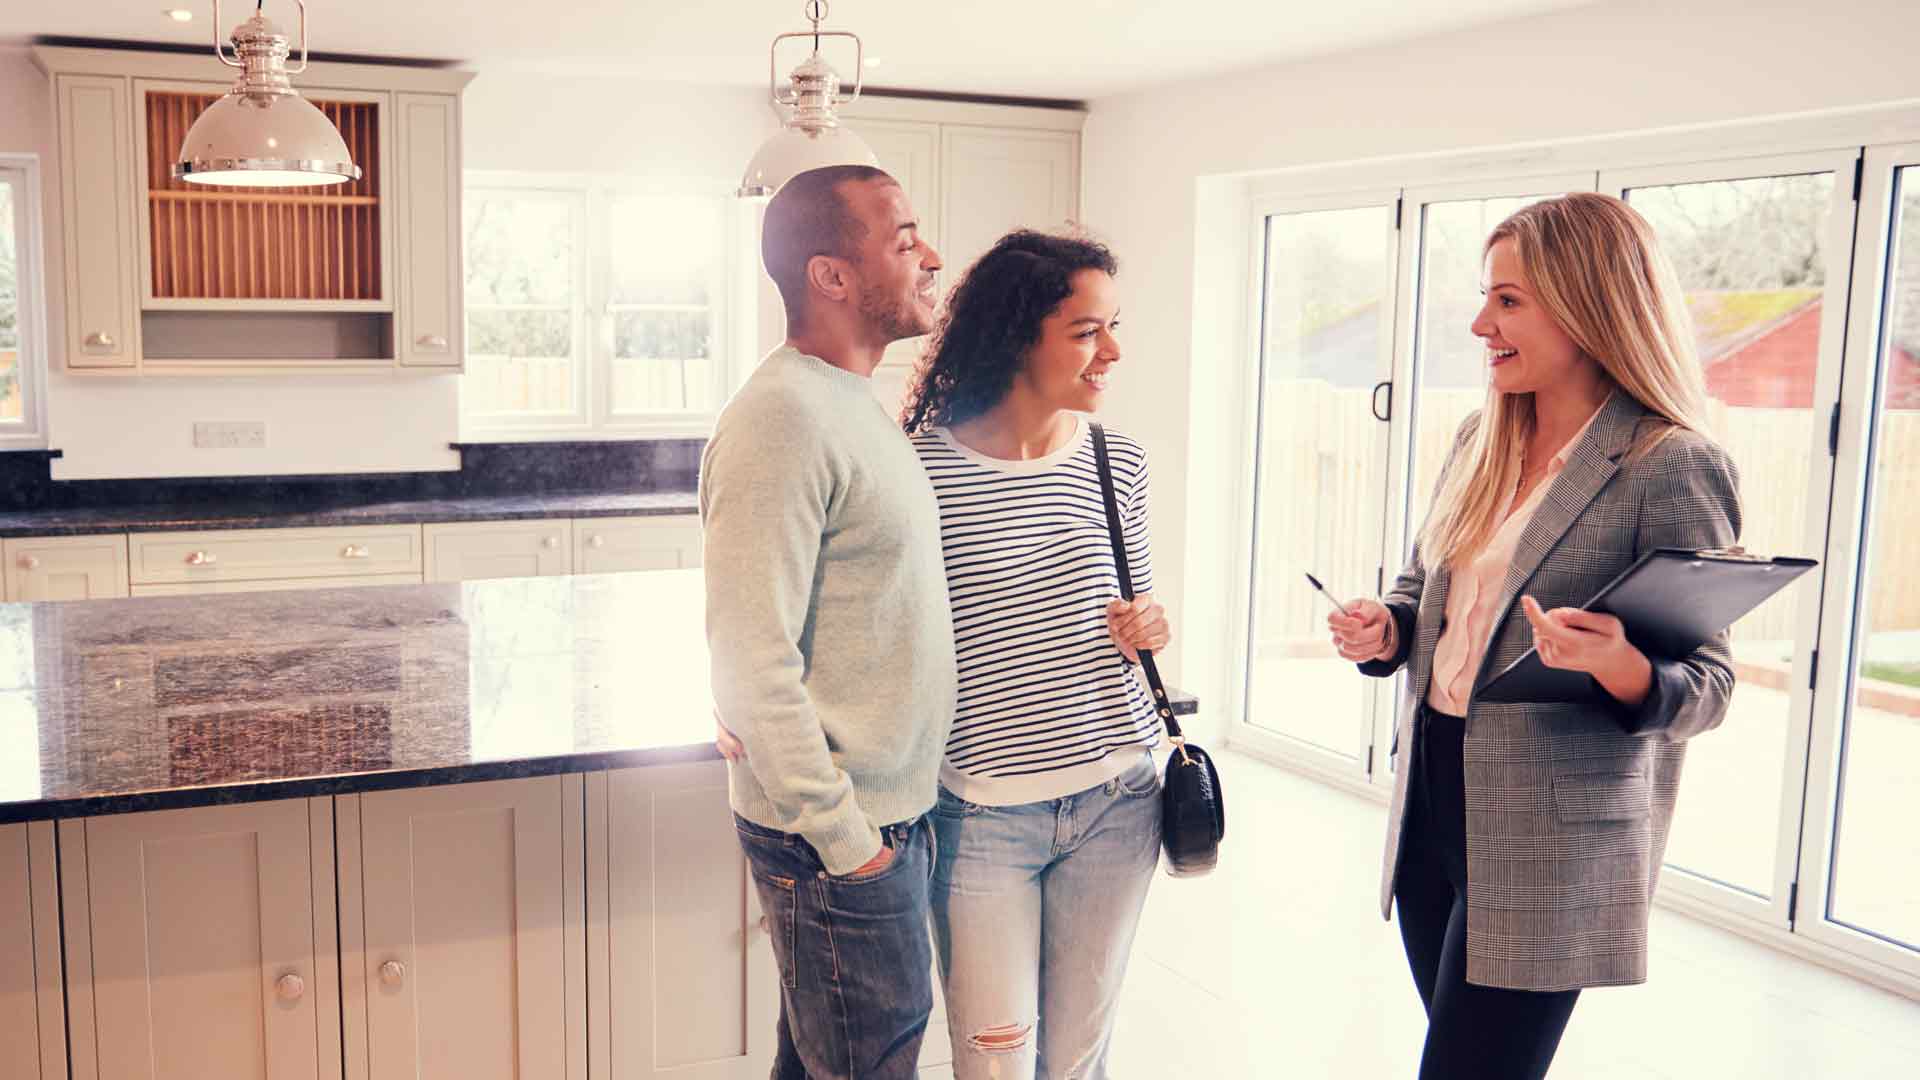 Couple asking questions to landlord when viewing a rental property.